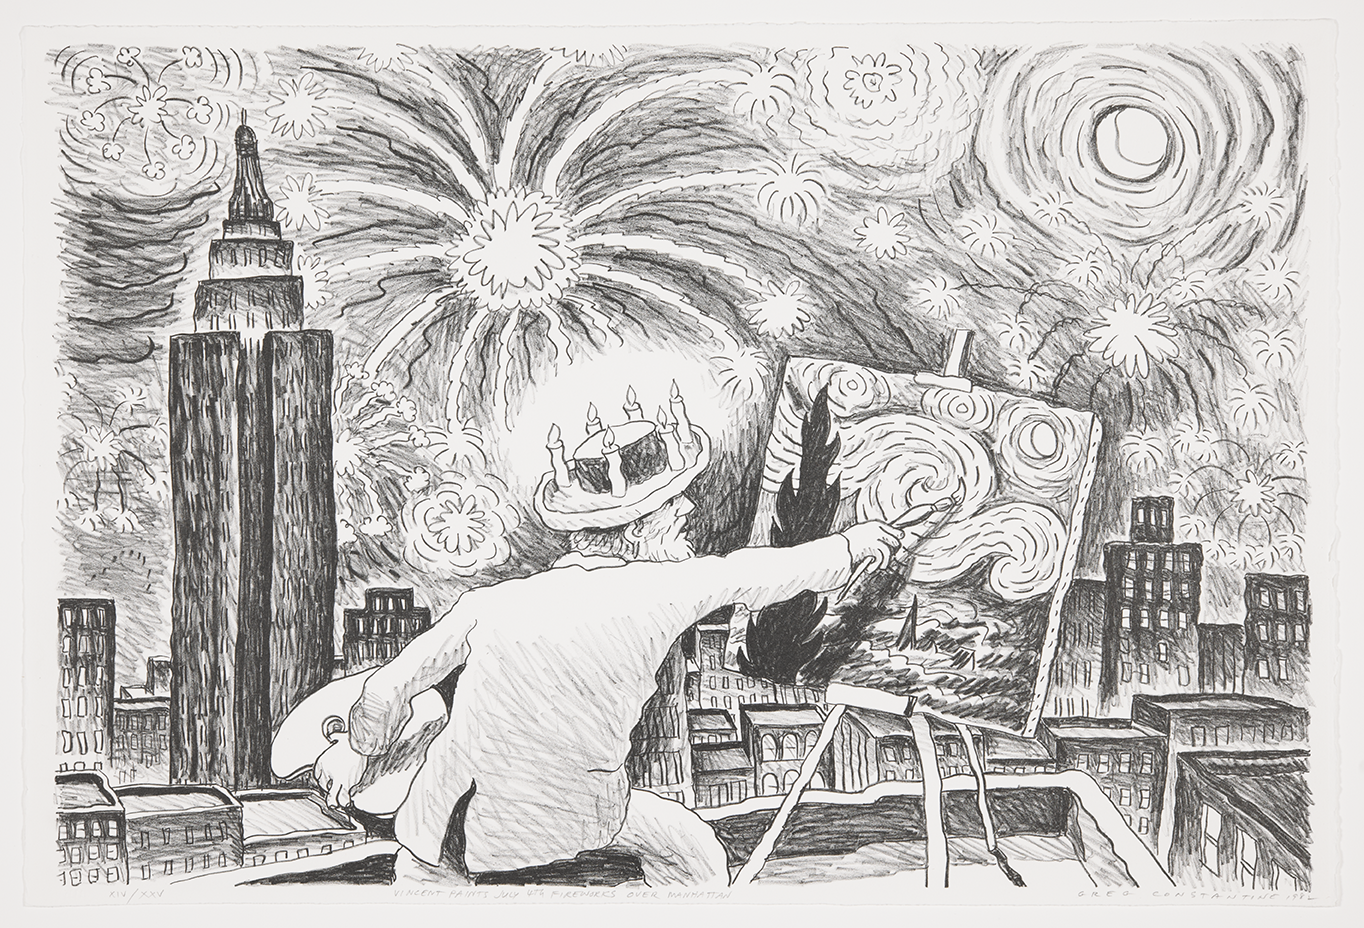 Gregory J. Constantine, Vincent Paints July 4th Fireworks over Manhattan, 1982, lithograph. Collection of the Kalamazoo Institute of Arts; Gift of Dr. Christopher A. Graf, 1985/6.22